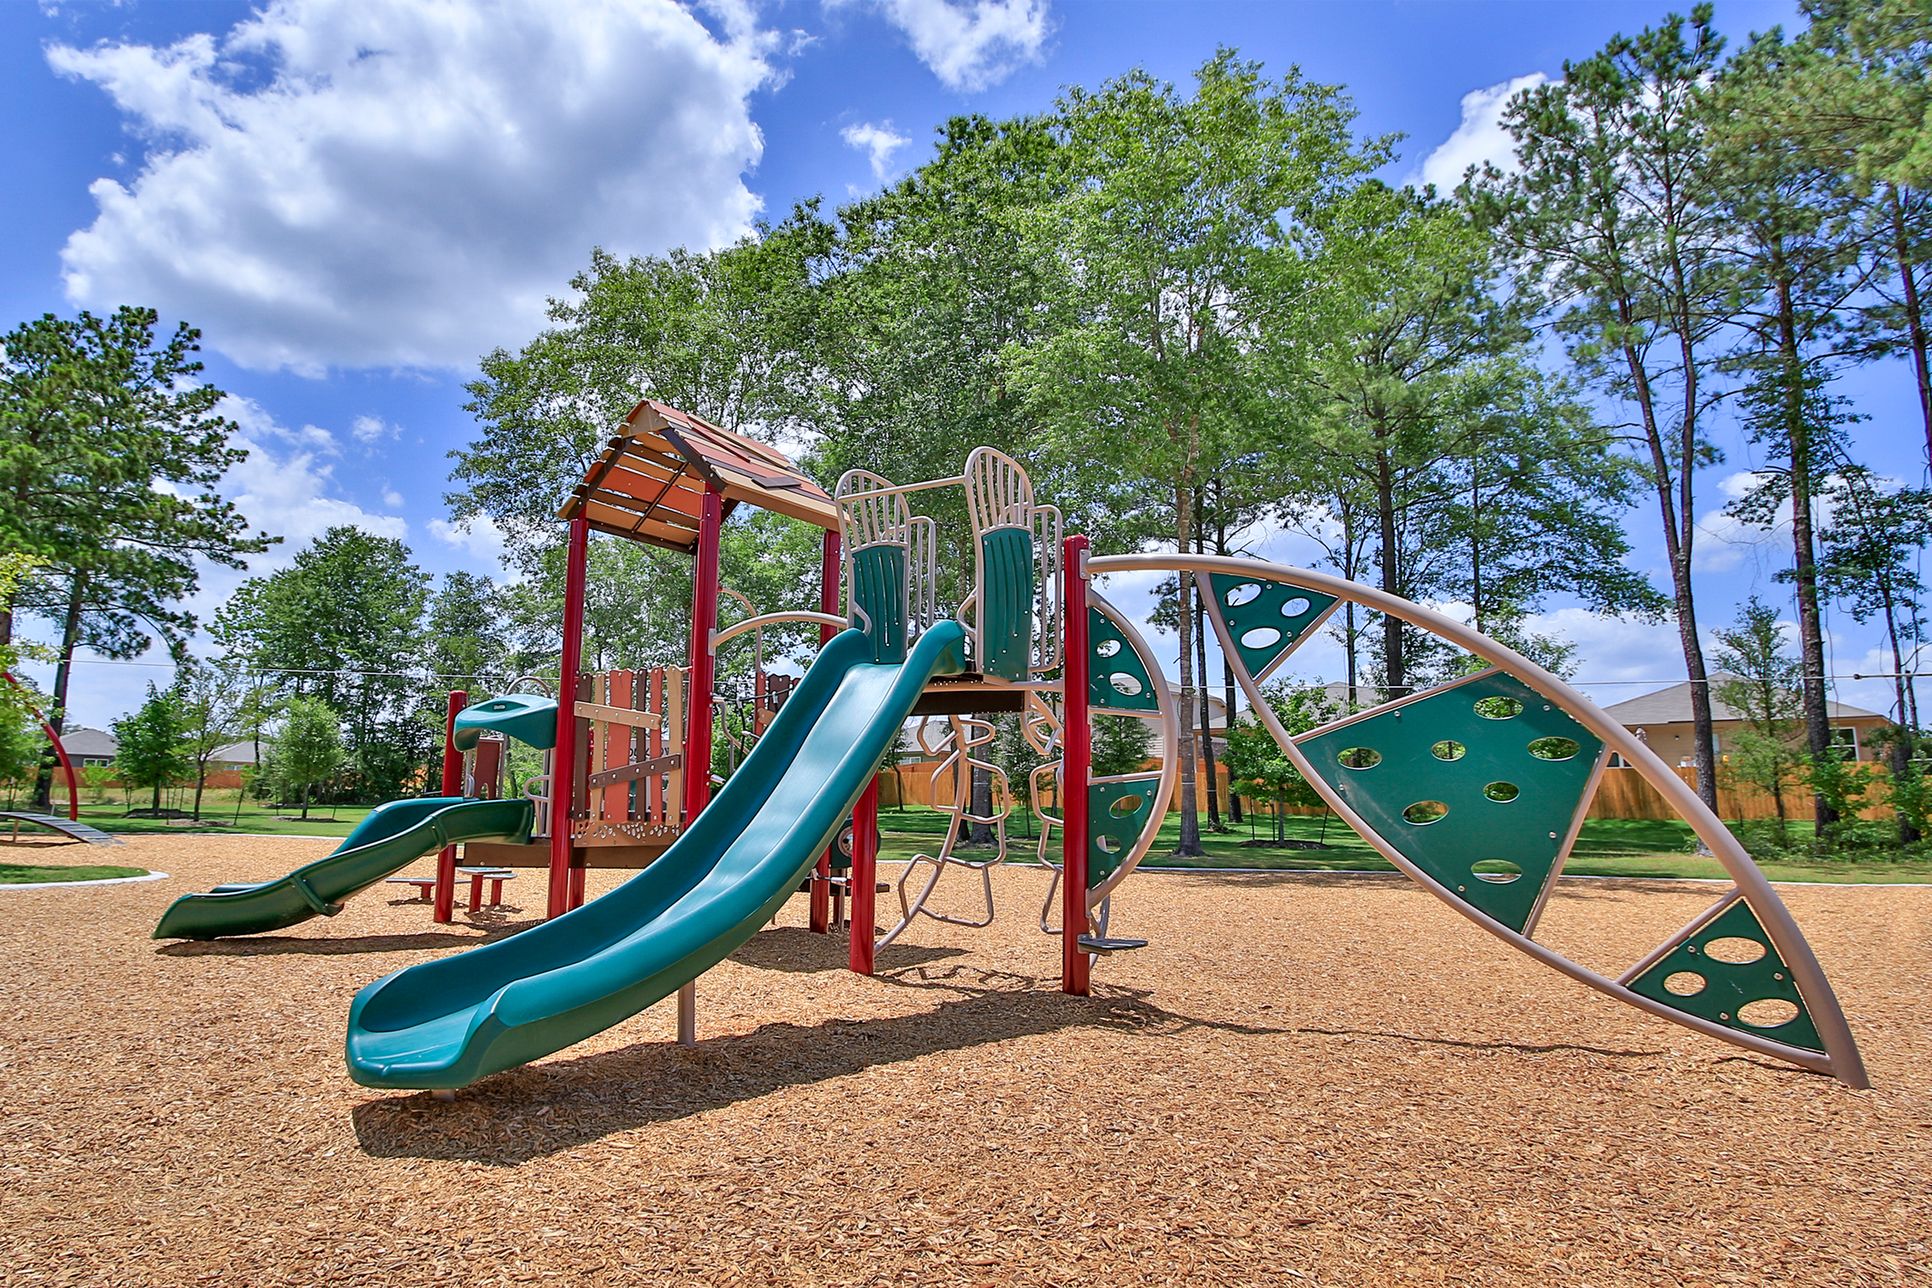 Pinewood Trails Park:The Pinewood Trails Park has a large playground,